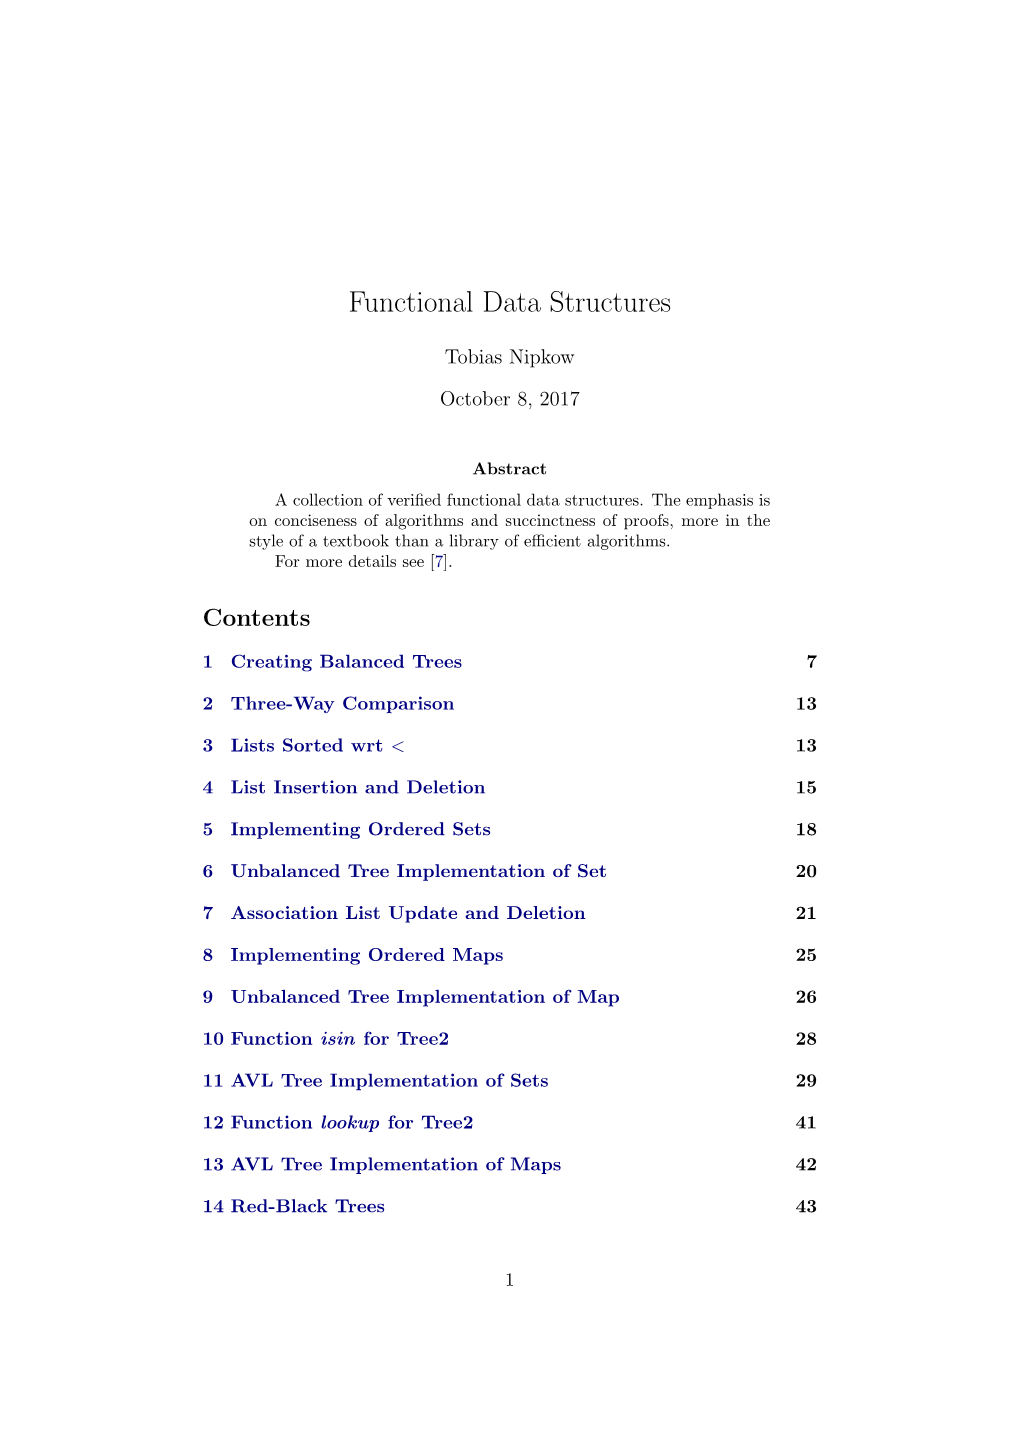 Functional Data Structures